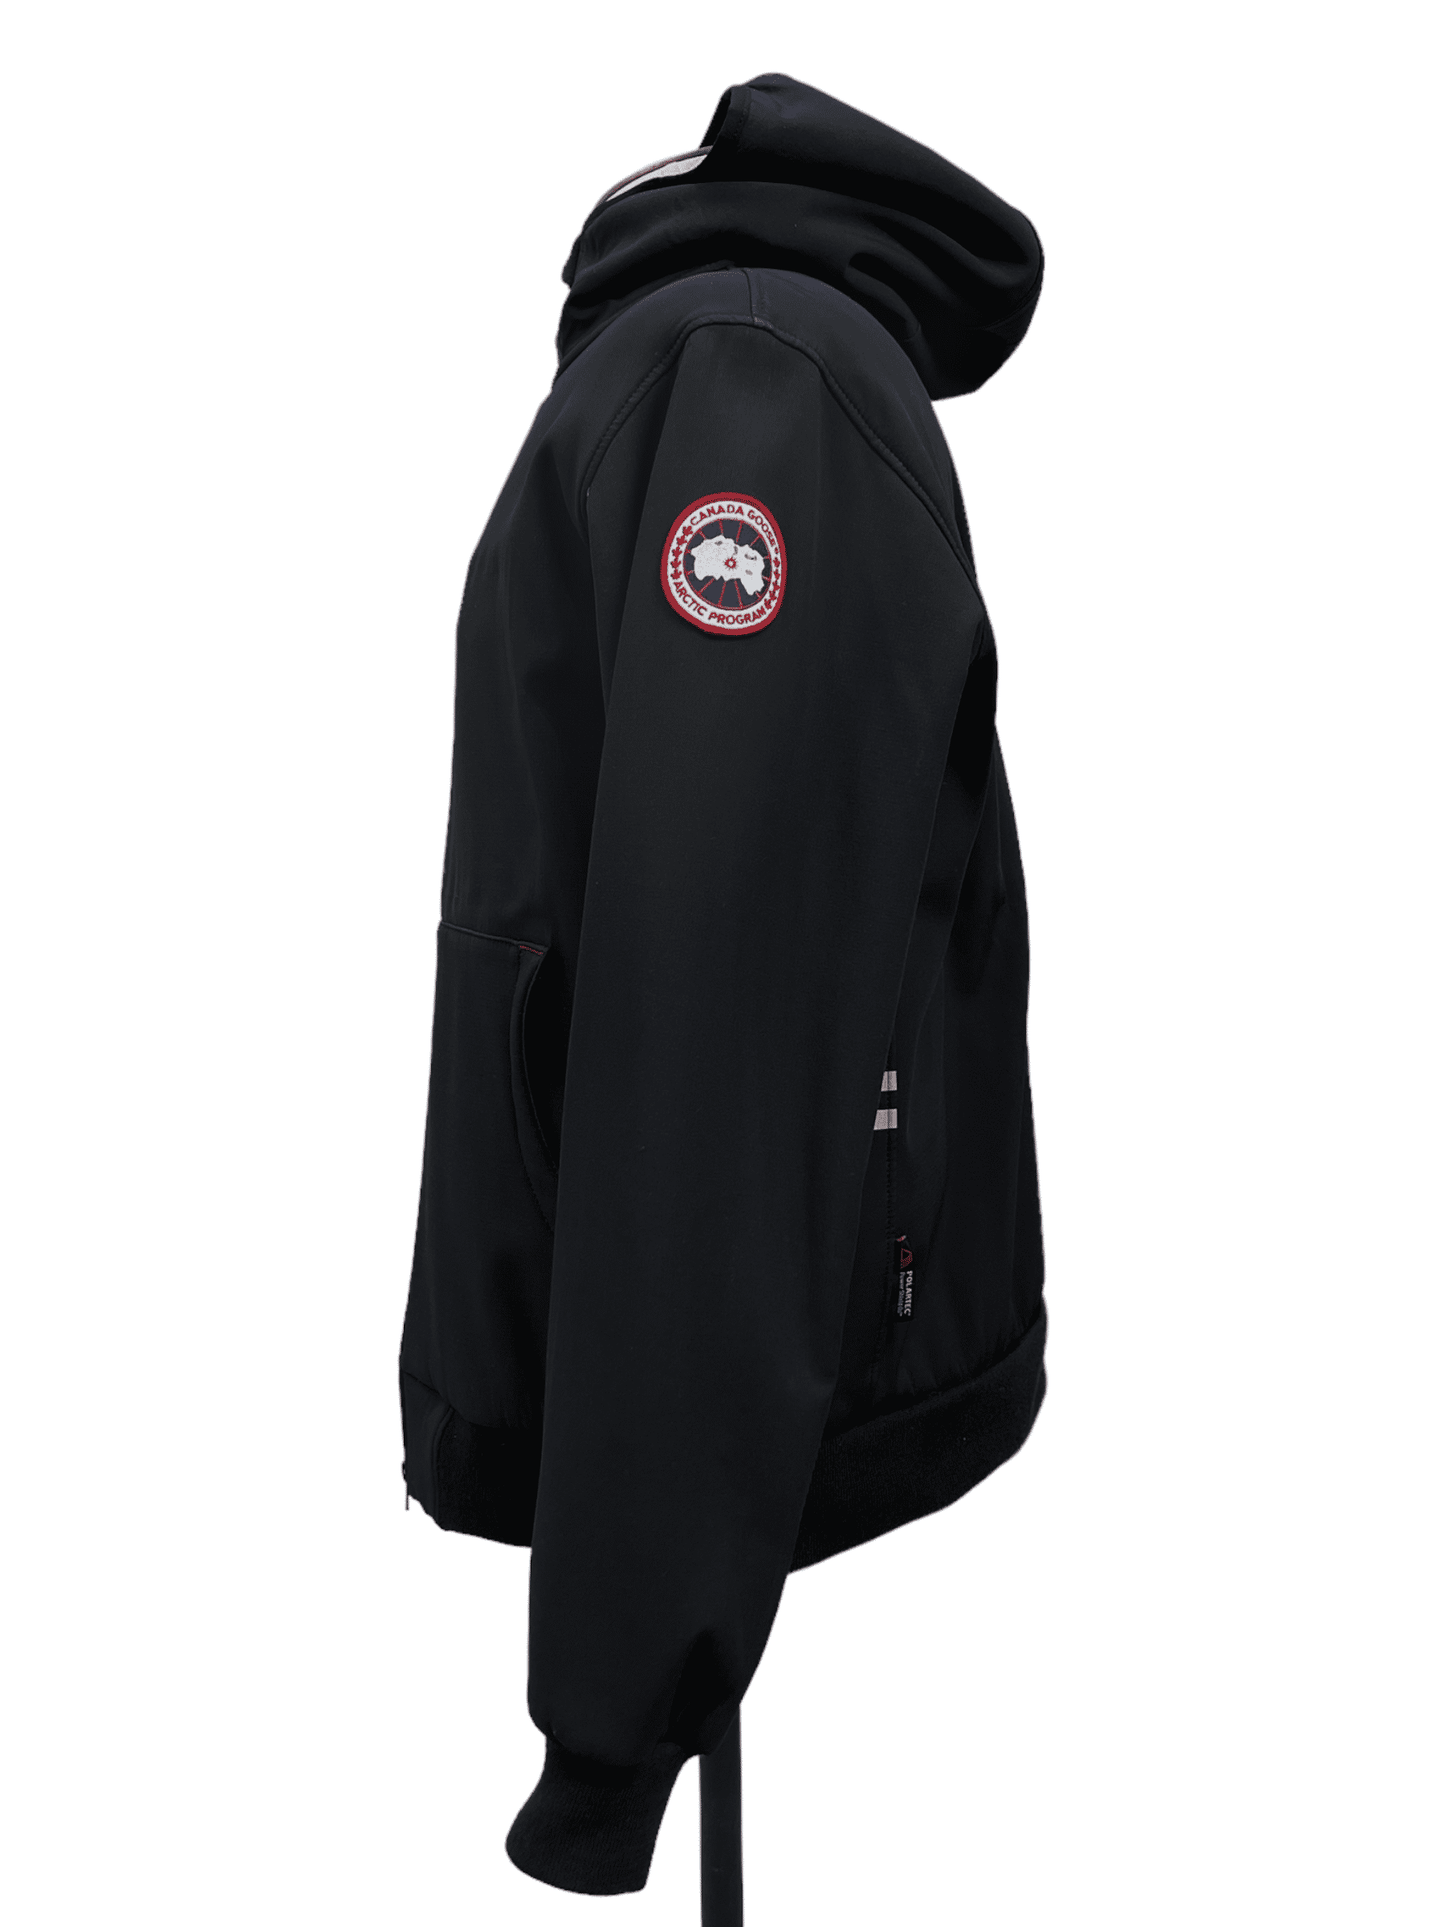 Canada Goose Black Jacket - Genuine Design Luxury Consignment for Men. New & Pre-Owned Clothing, Shoes, & Accessories. Calgary, Canada